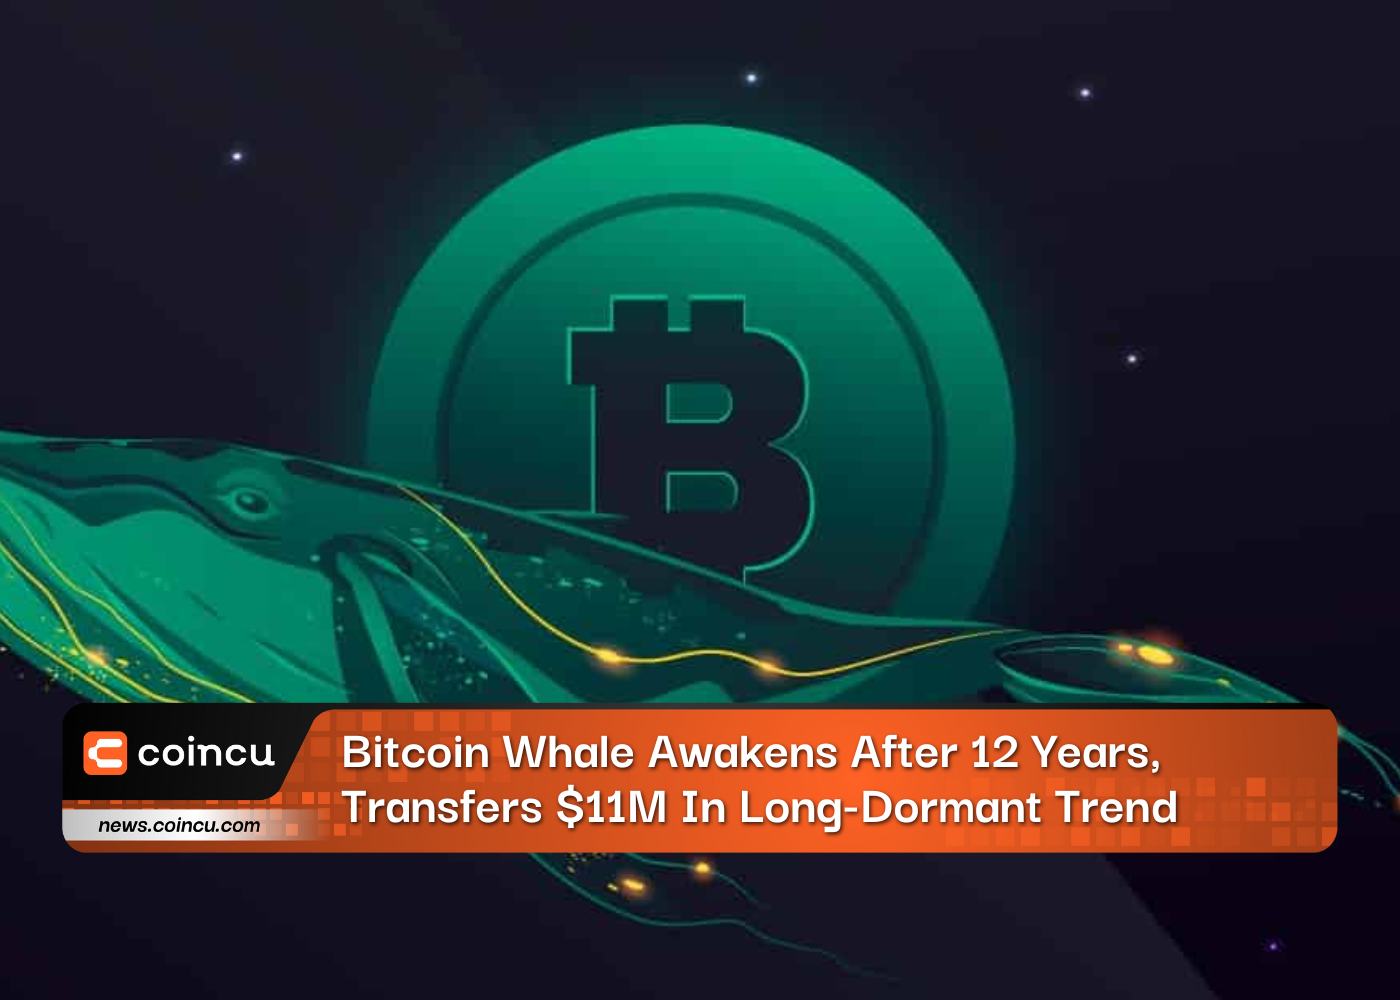 Bitcoin Whale Awakens After 12 Years, Transfers $11M In Long-Dormant Trend